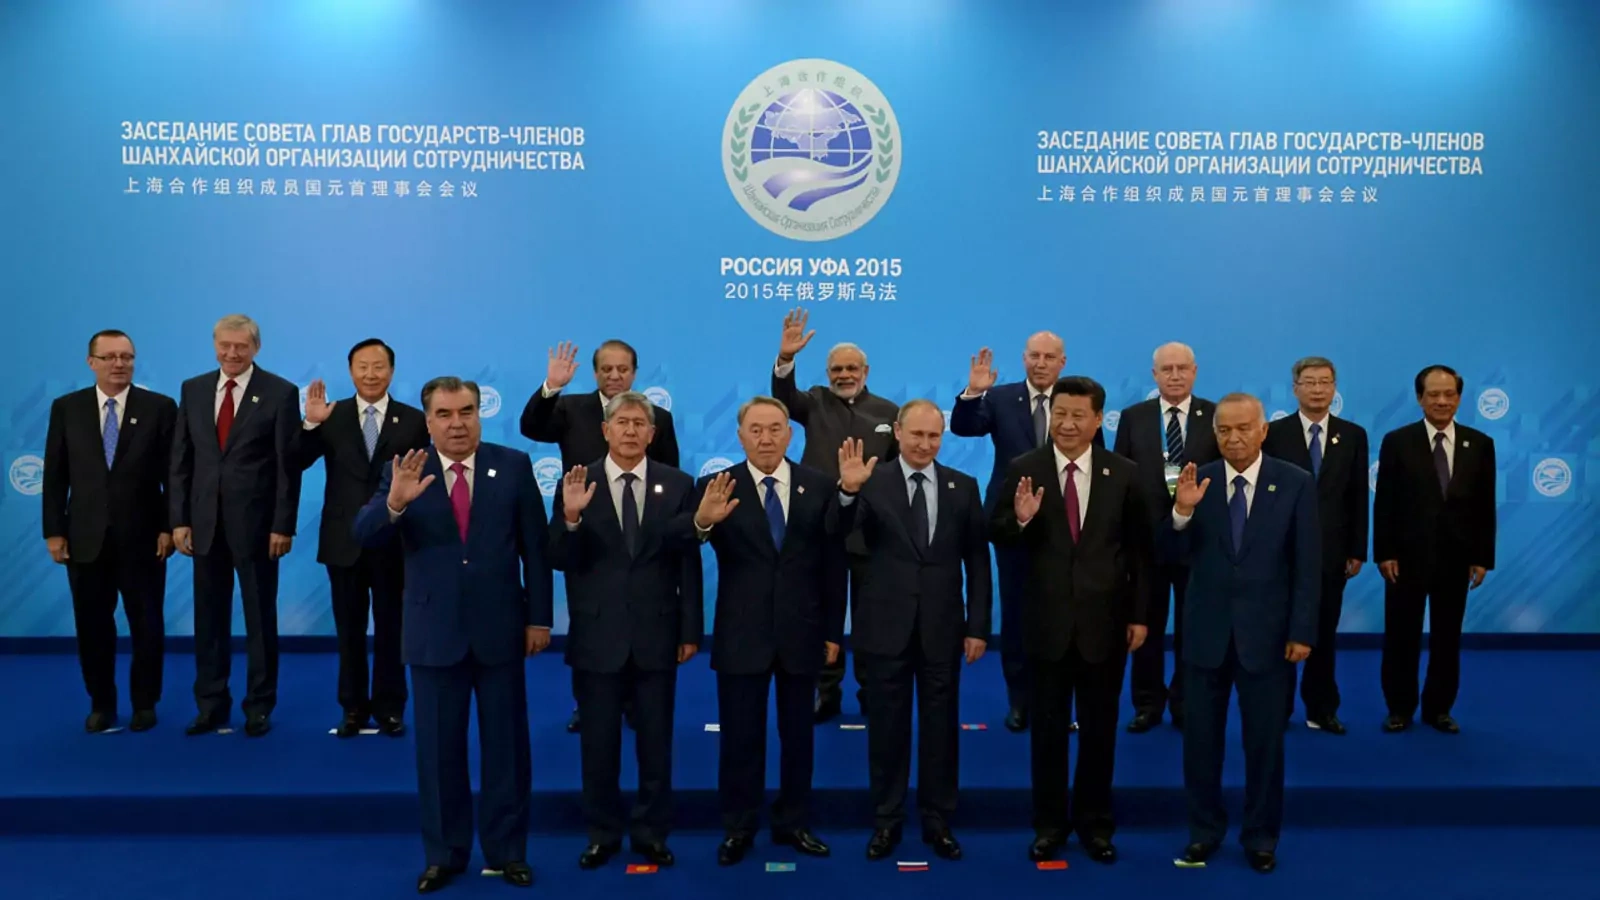 The SCO heads of state, the heads of observer states and governments, and international organisation delegation heads during the Shanghai Cooperation Organization (SCO) summit in Ufa, Russia, July 10, 2015. 